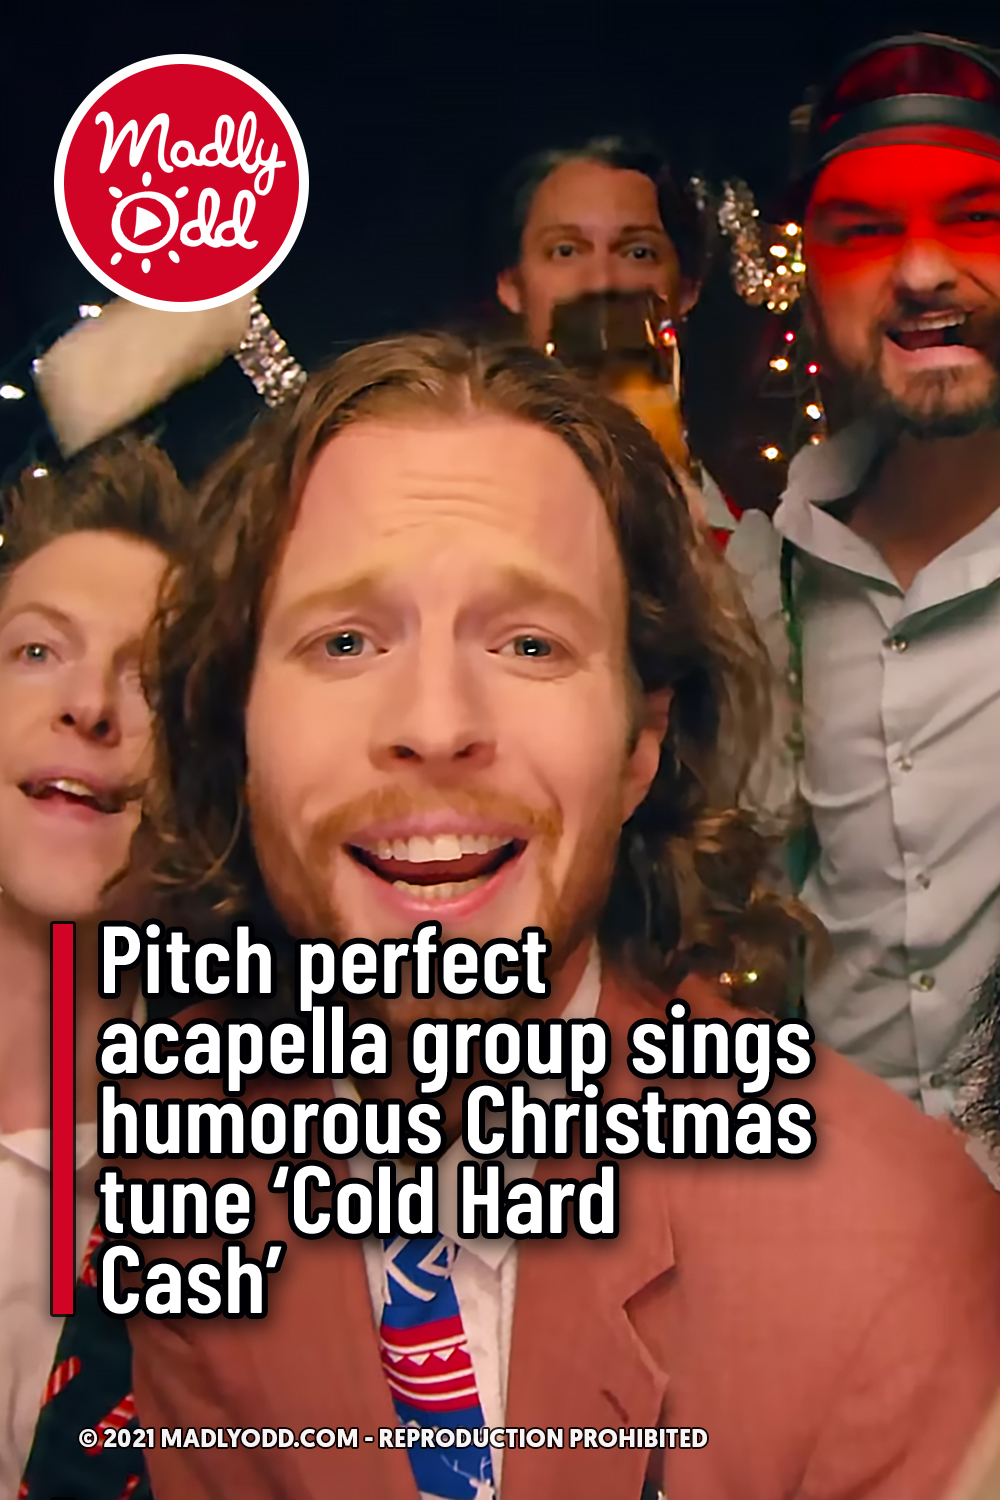 Pitch perfect acapella group sings humorous Christmas tune ‘Cold Hard Cash’